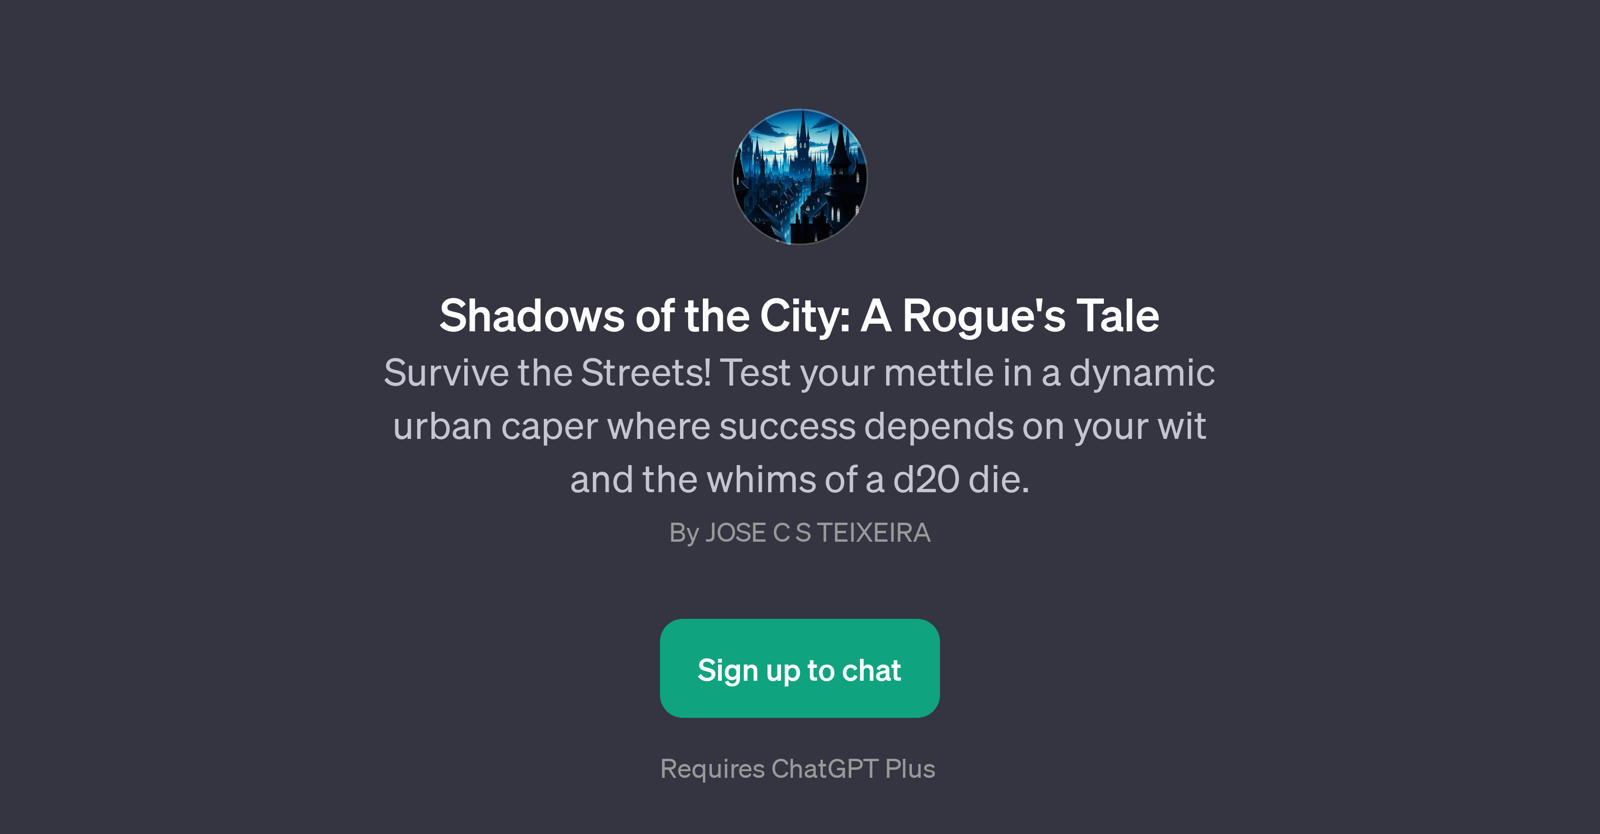 Shadows of the City: A Rogue's Tale website